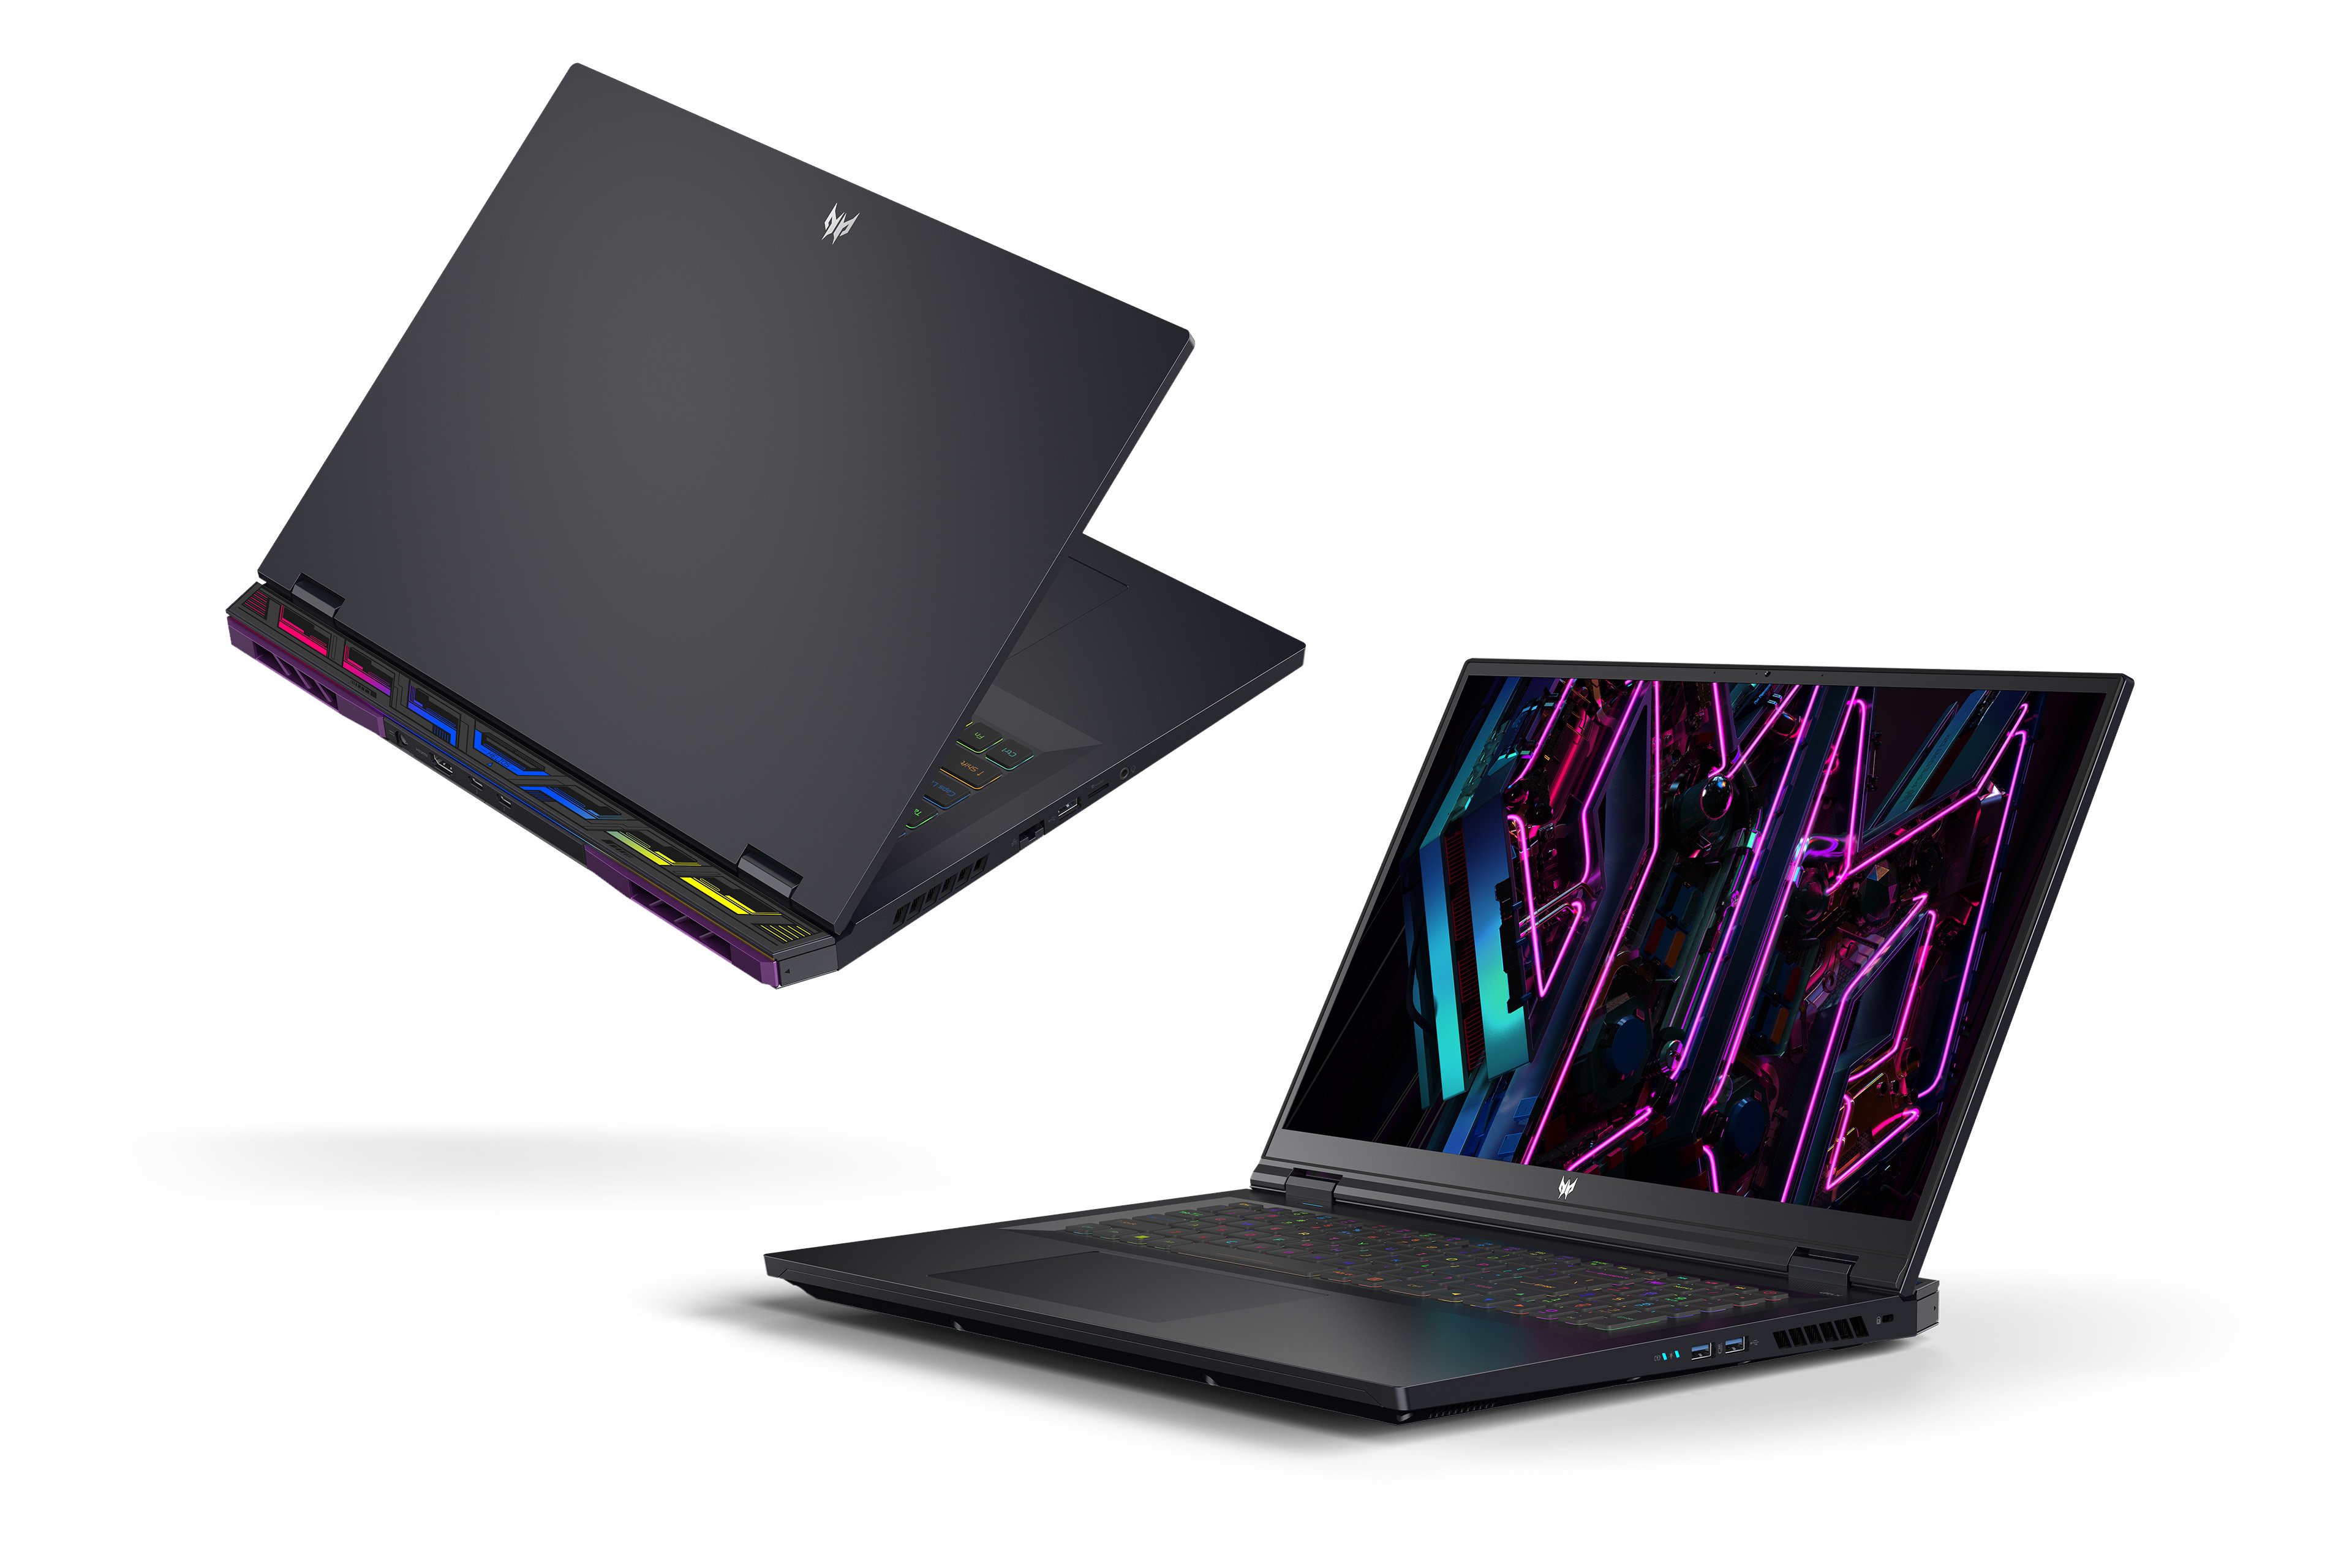 Acer Boosts its Gaming Portfolio with New Predator Laptops and